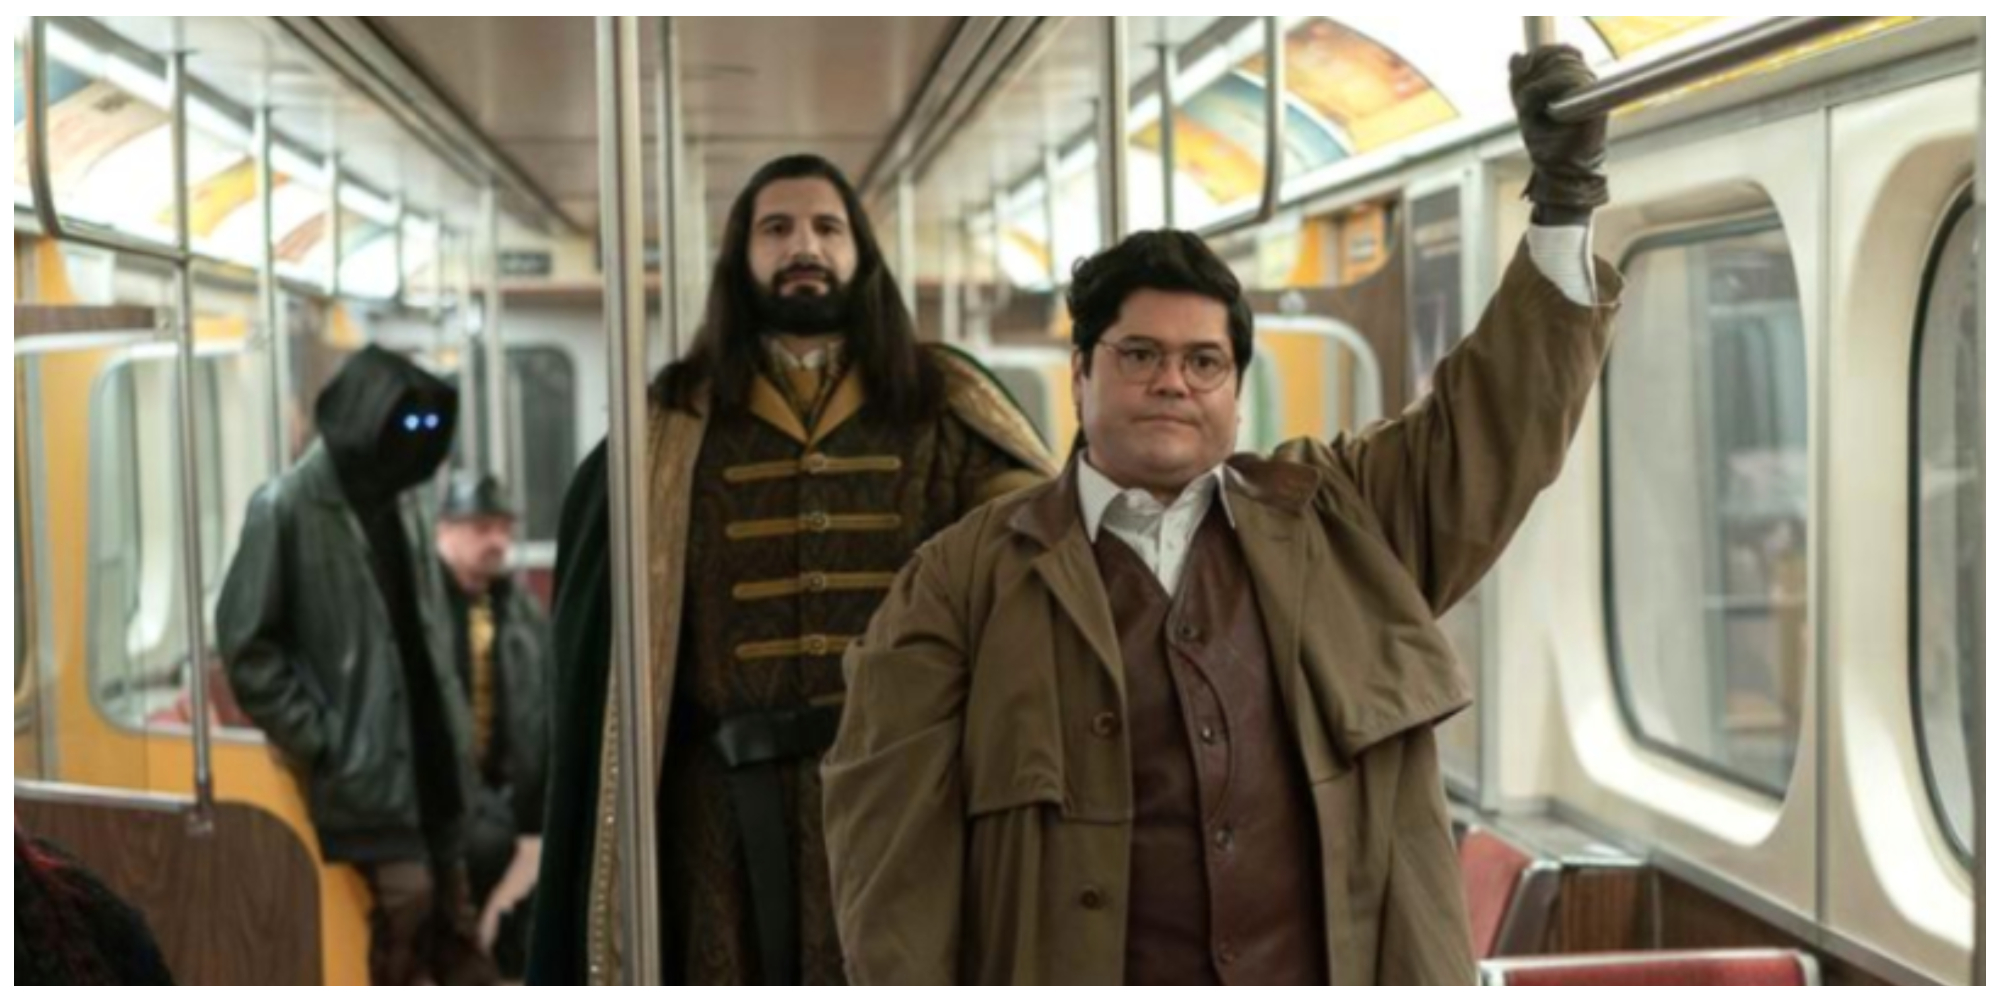 Harvey Guillén as Guillermo in 'What We Do in the Shadows' holds onto a metal bar in a subway car while Kayvan Novak as Nandor stands behind him